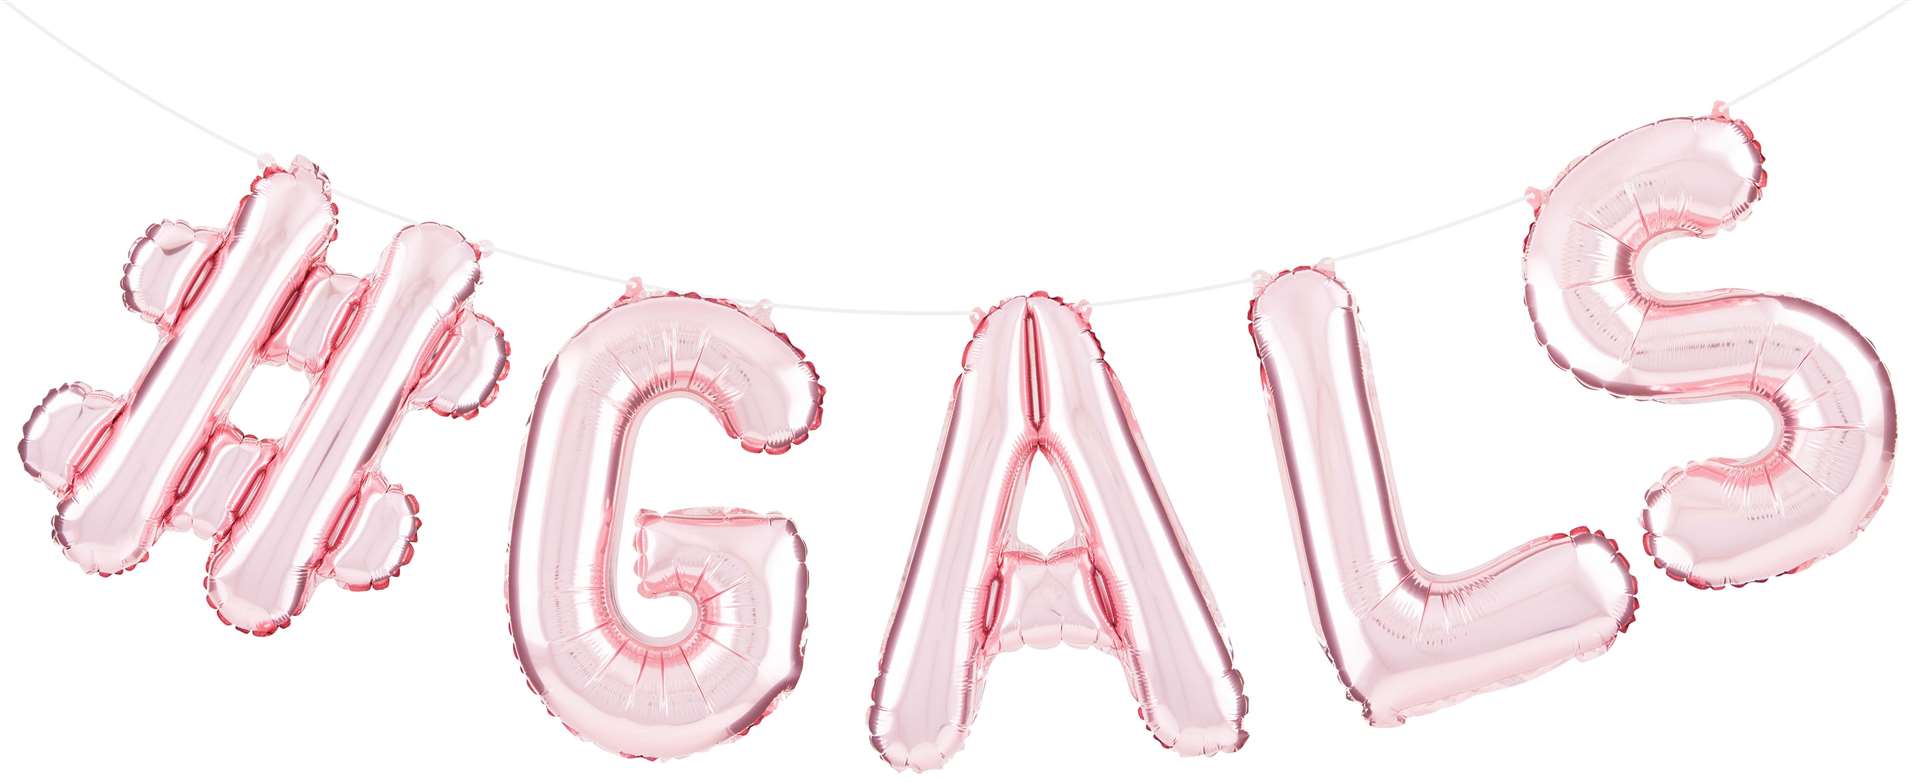 Valentines or Galentines? If you're joining the cool kids and celebrating friendship these balloons are just the thing.